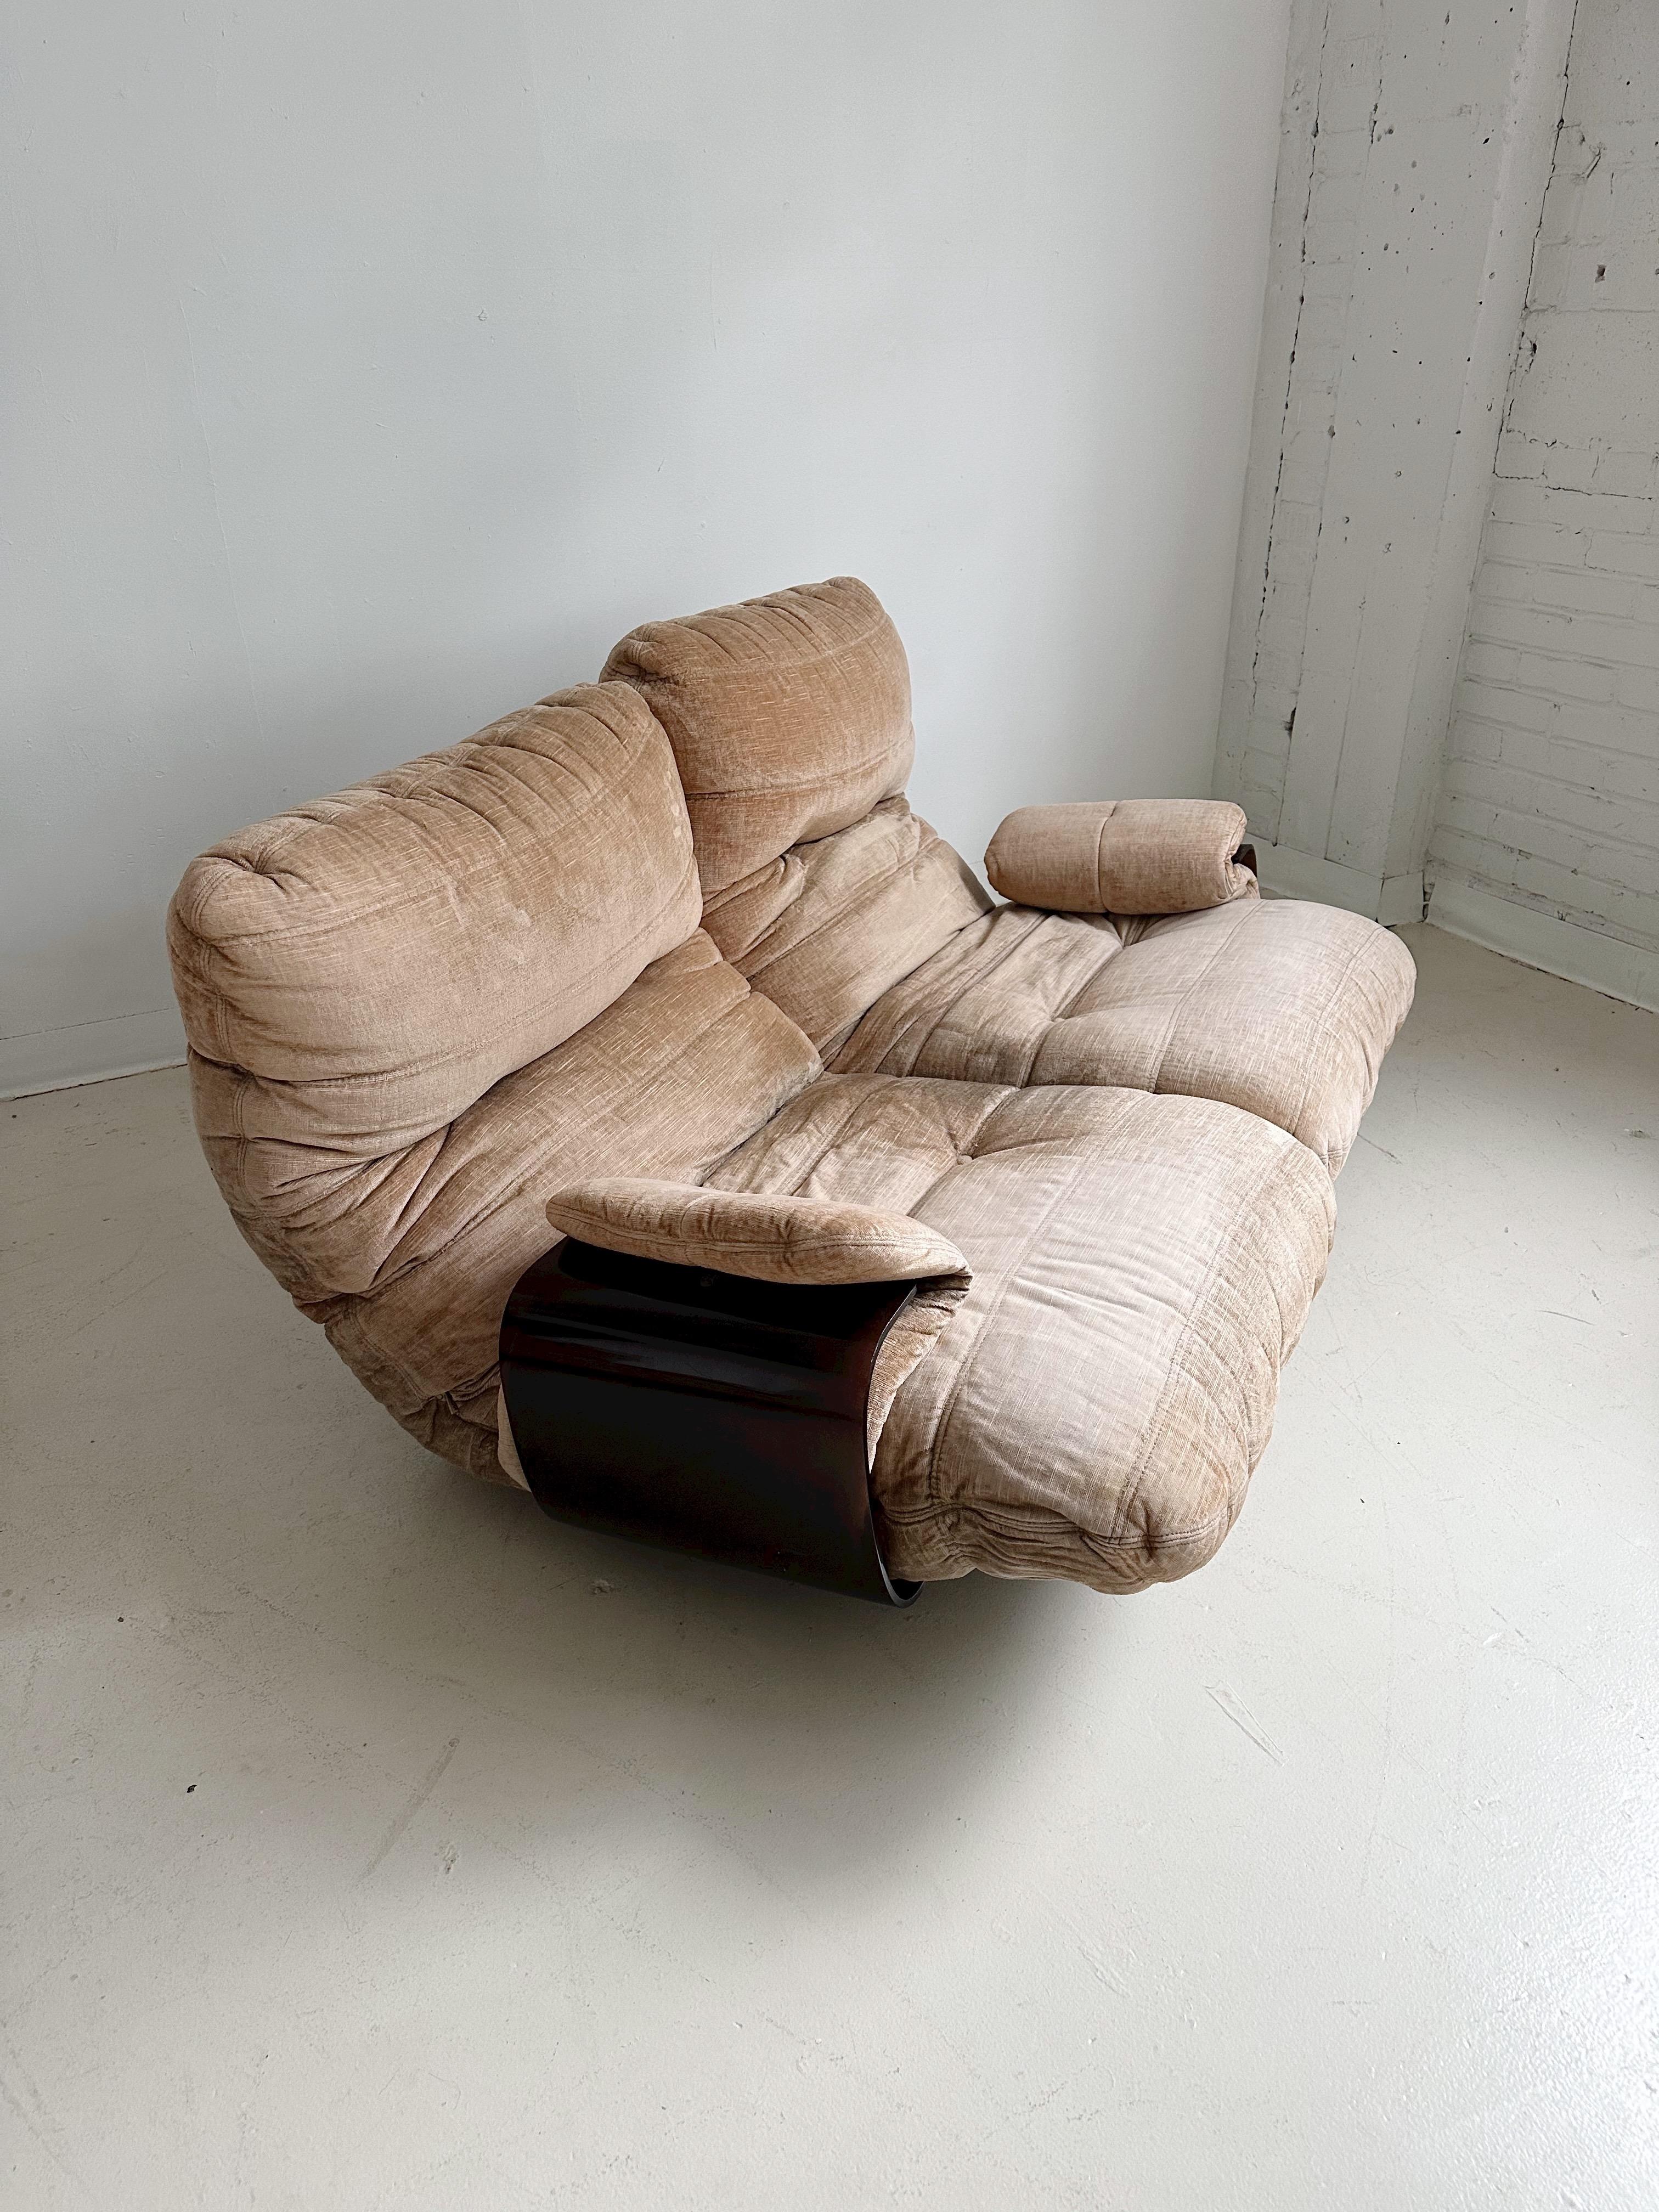 Two Marsala 2 Seater Sofas by Michel Ducaroy for Ligne Roset, 70's

Price is FOR ONE SOFA.

Features a dark brown plexiglass base and light brown cushions.

//

Dimensions:
54”W x 44”D x 28”H  each

Seat height 15